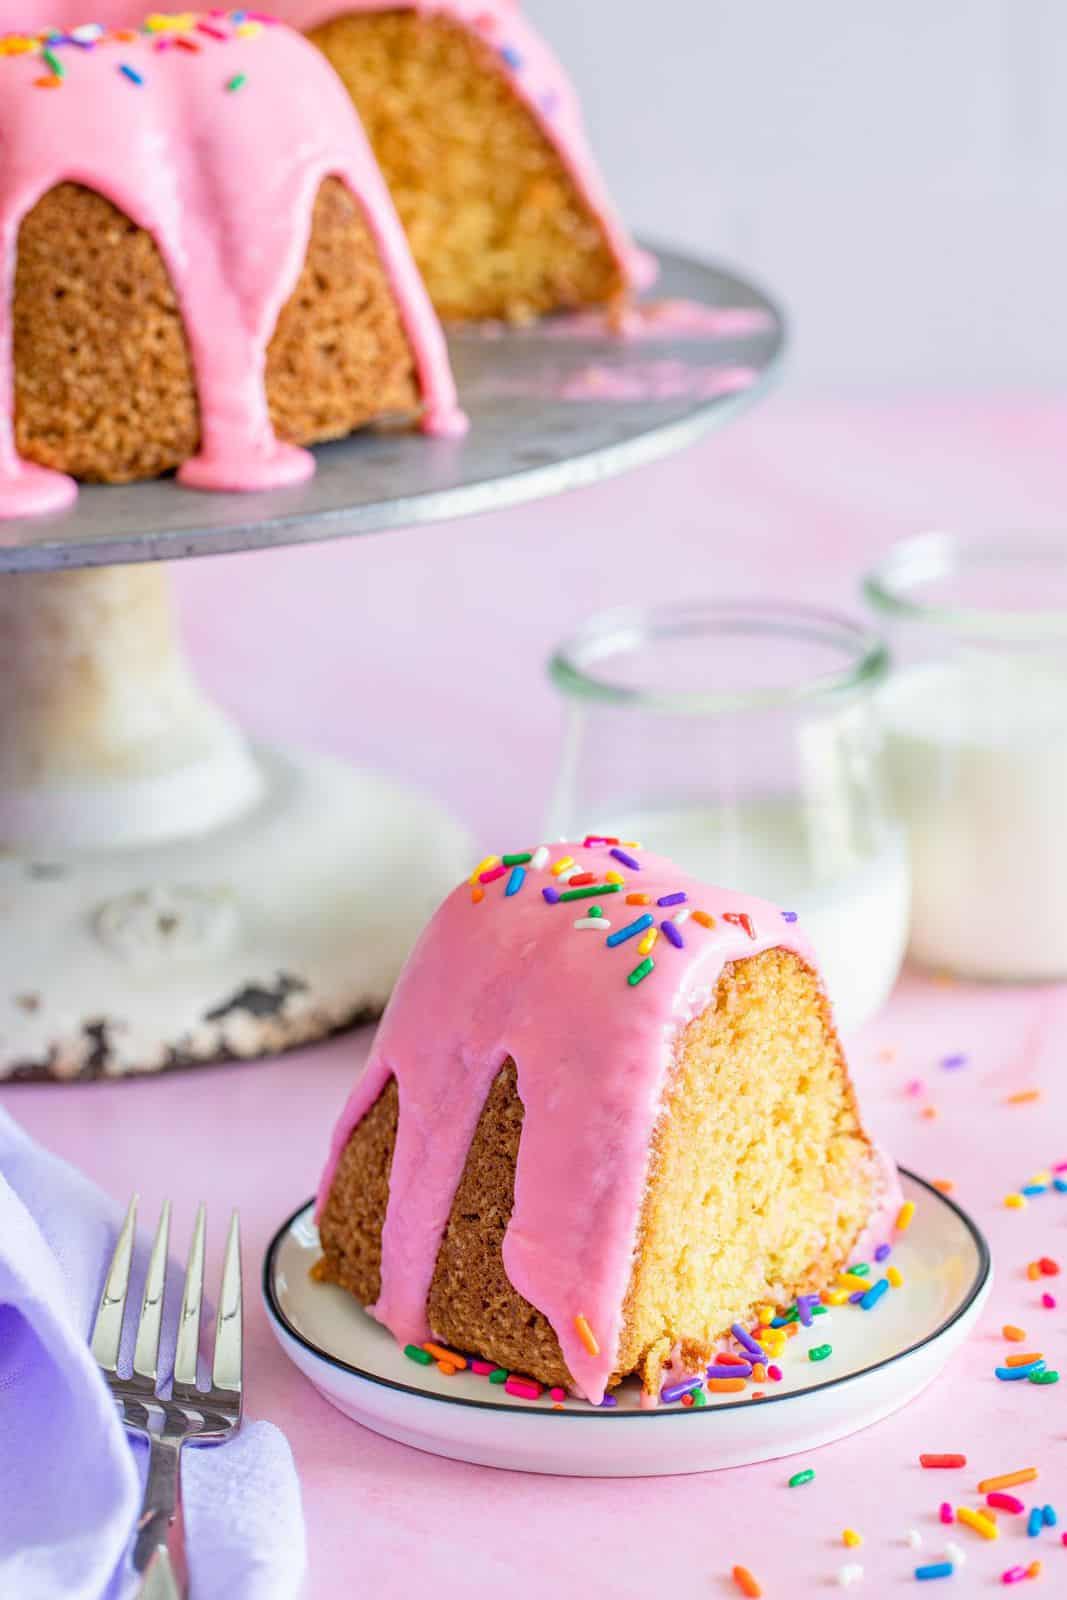 Slice of Donut Cake on plate with cake on cake stand in background